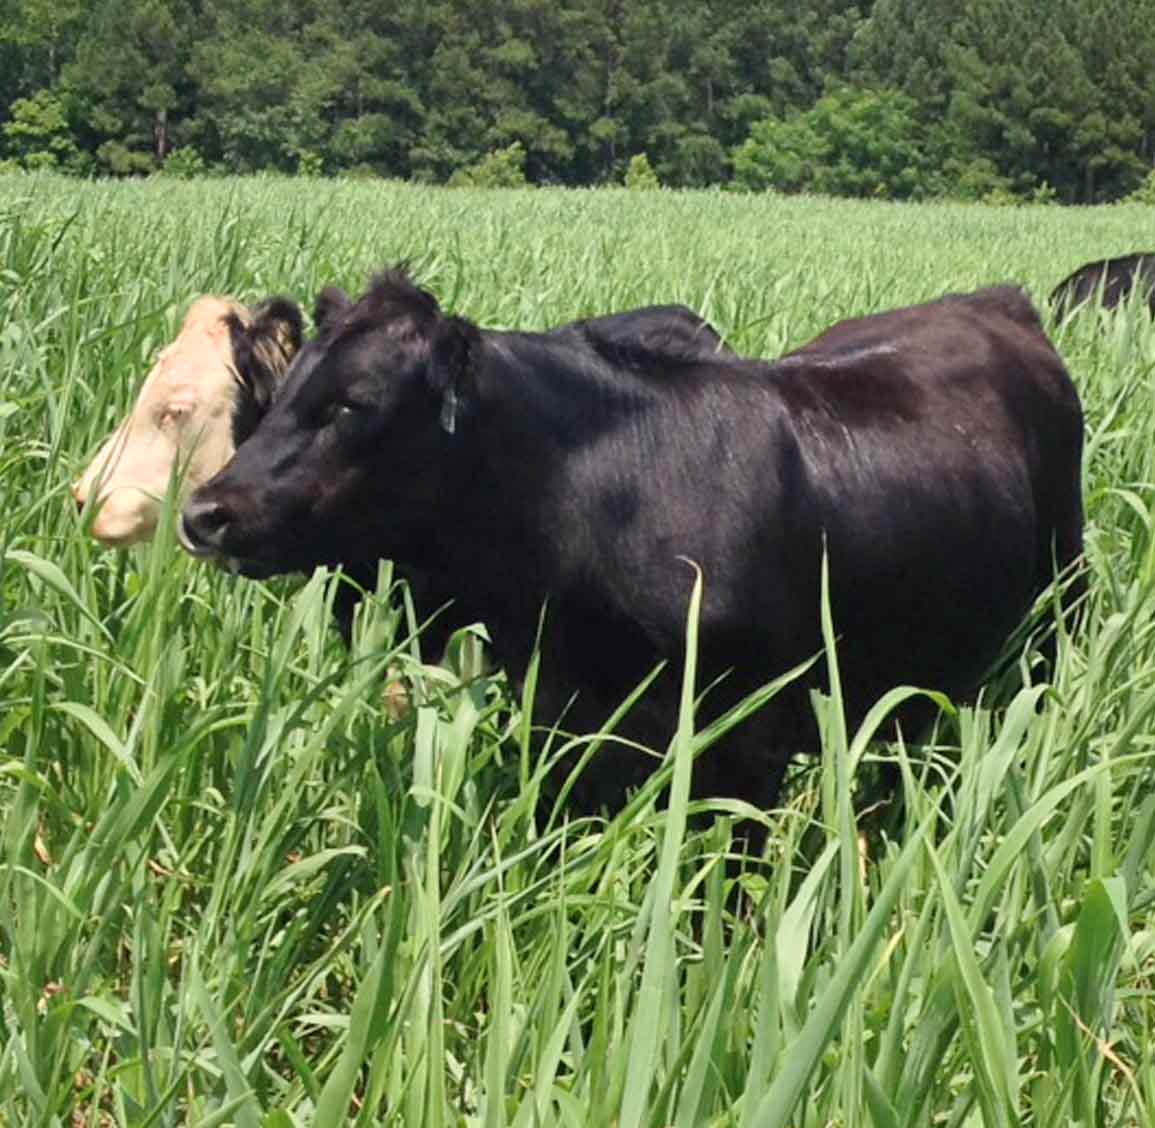 For the first time in several years, beef cattle are Georgia's second most valuable commodity.